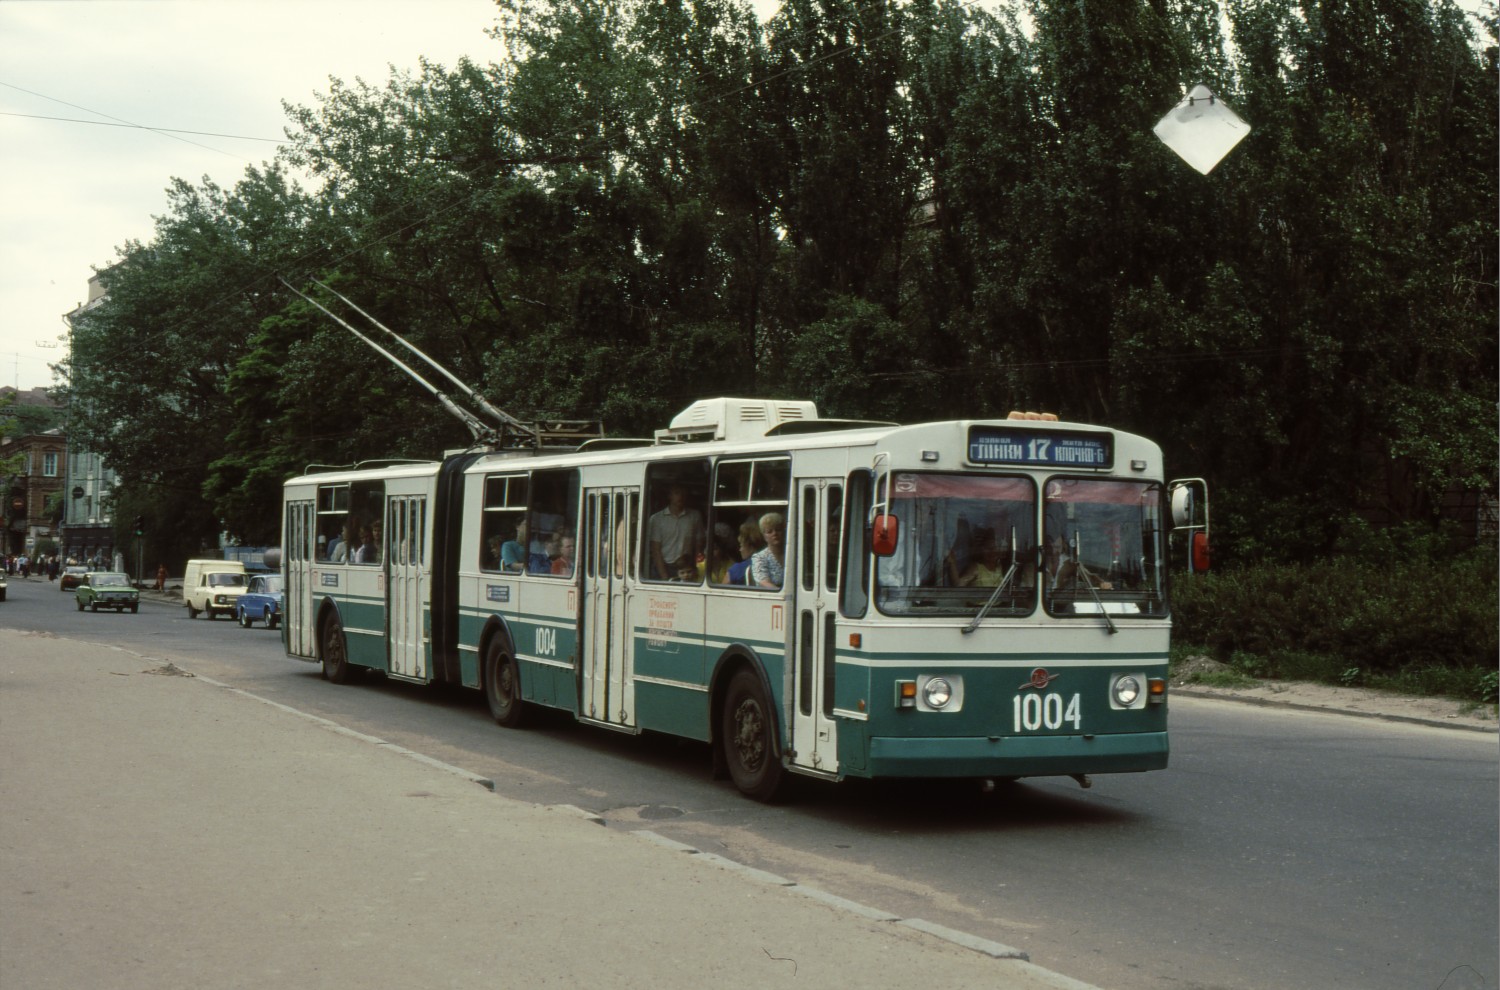 Dnipras, ZiU-683B [B00] nr. 1004; Dnipras — Old photos: Shots by foreign photographers